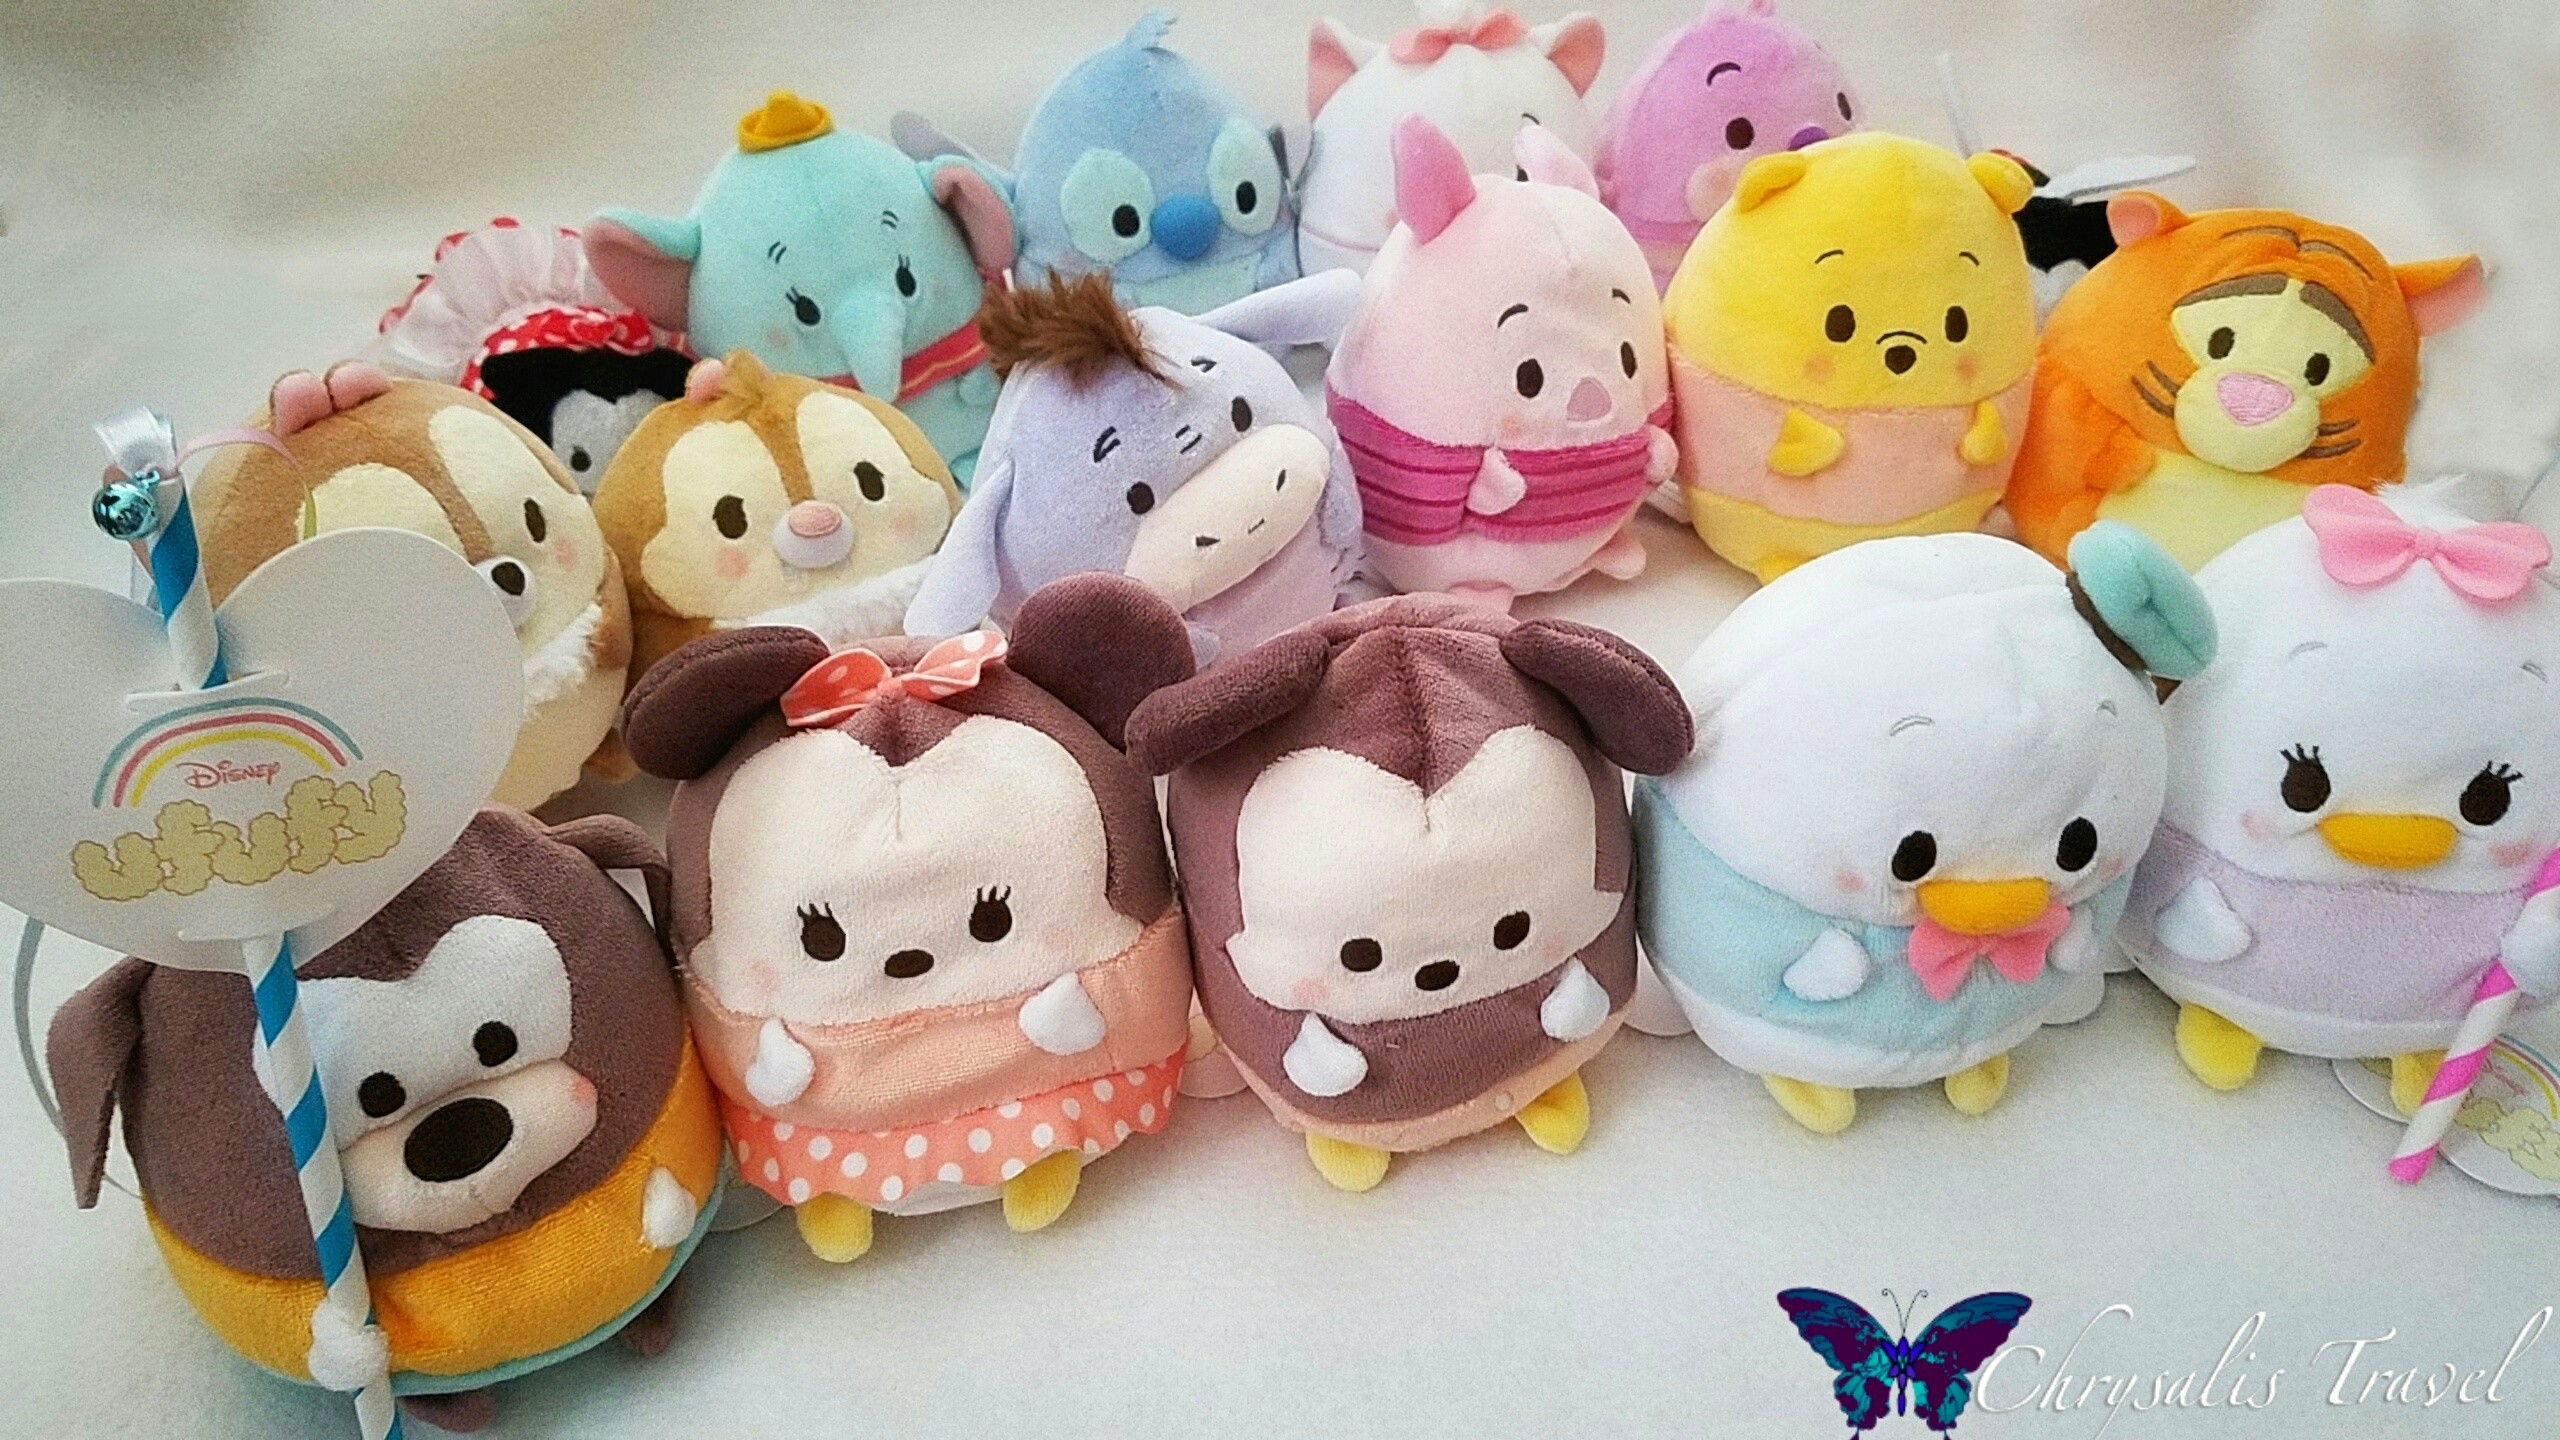 2560x1440 ufufy-group-picture